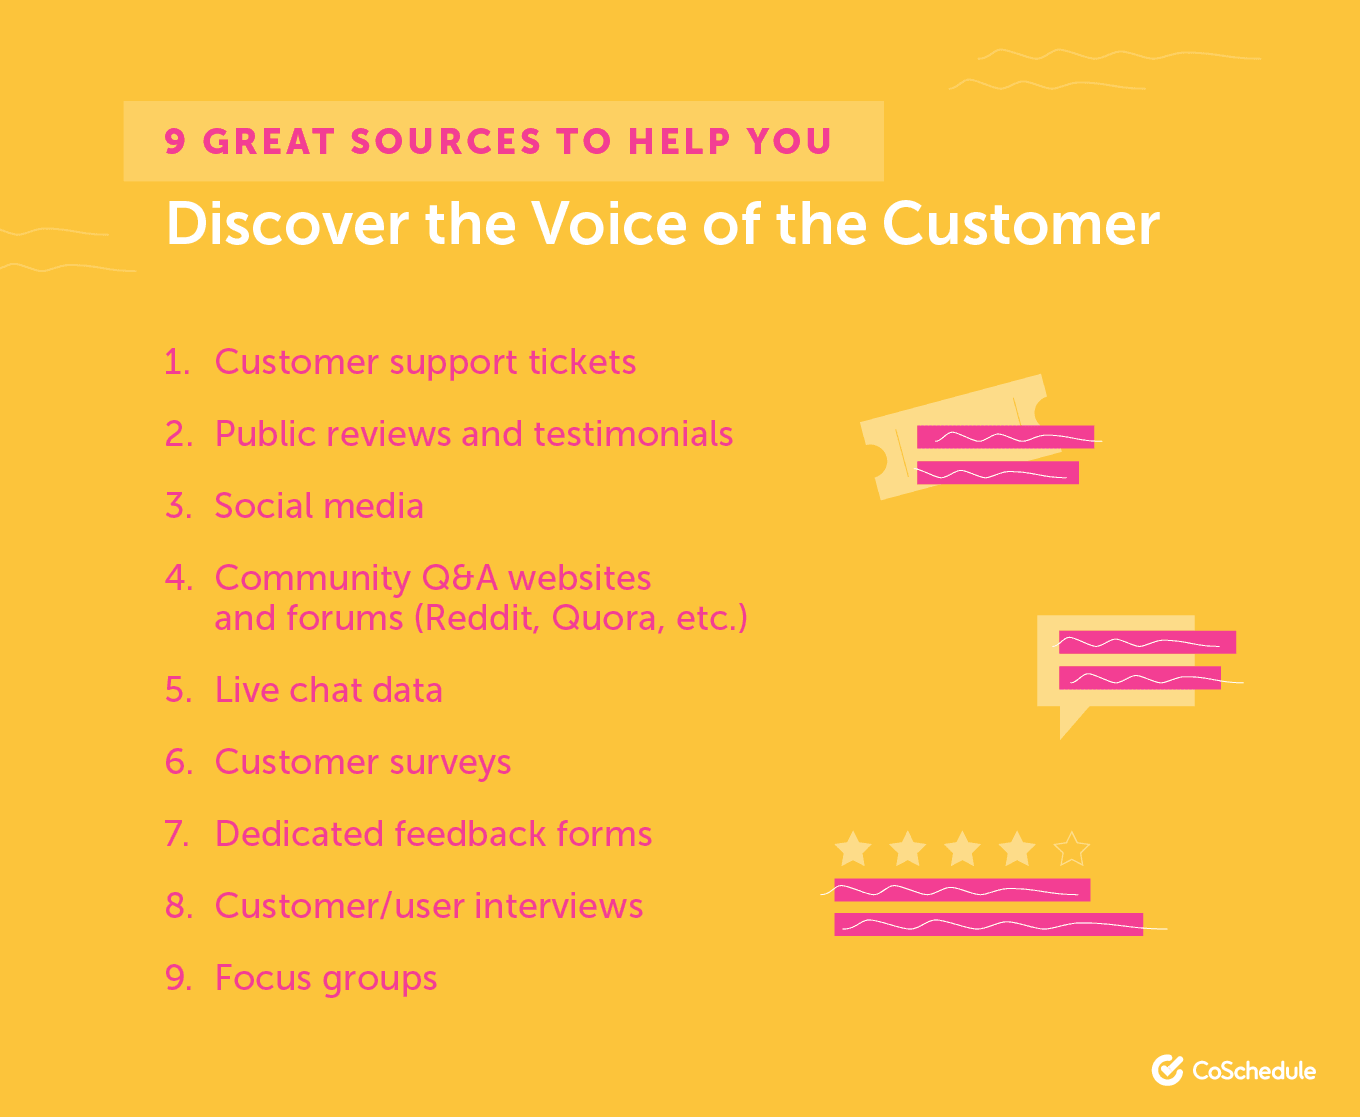 9 Great Sources to Help You Discover the Voice of the Customer